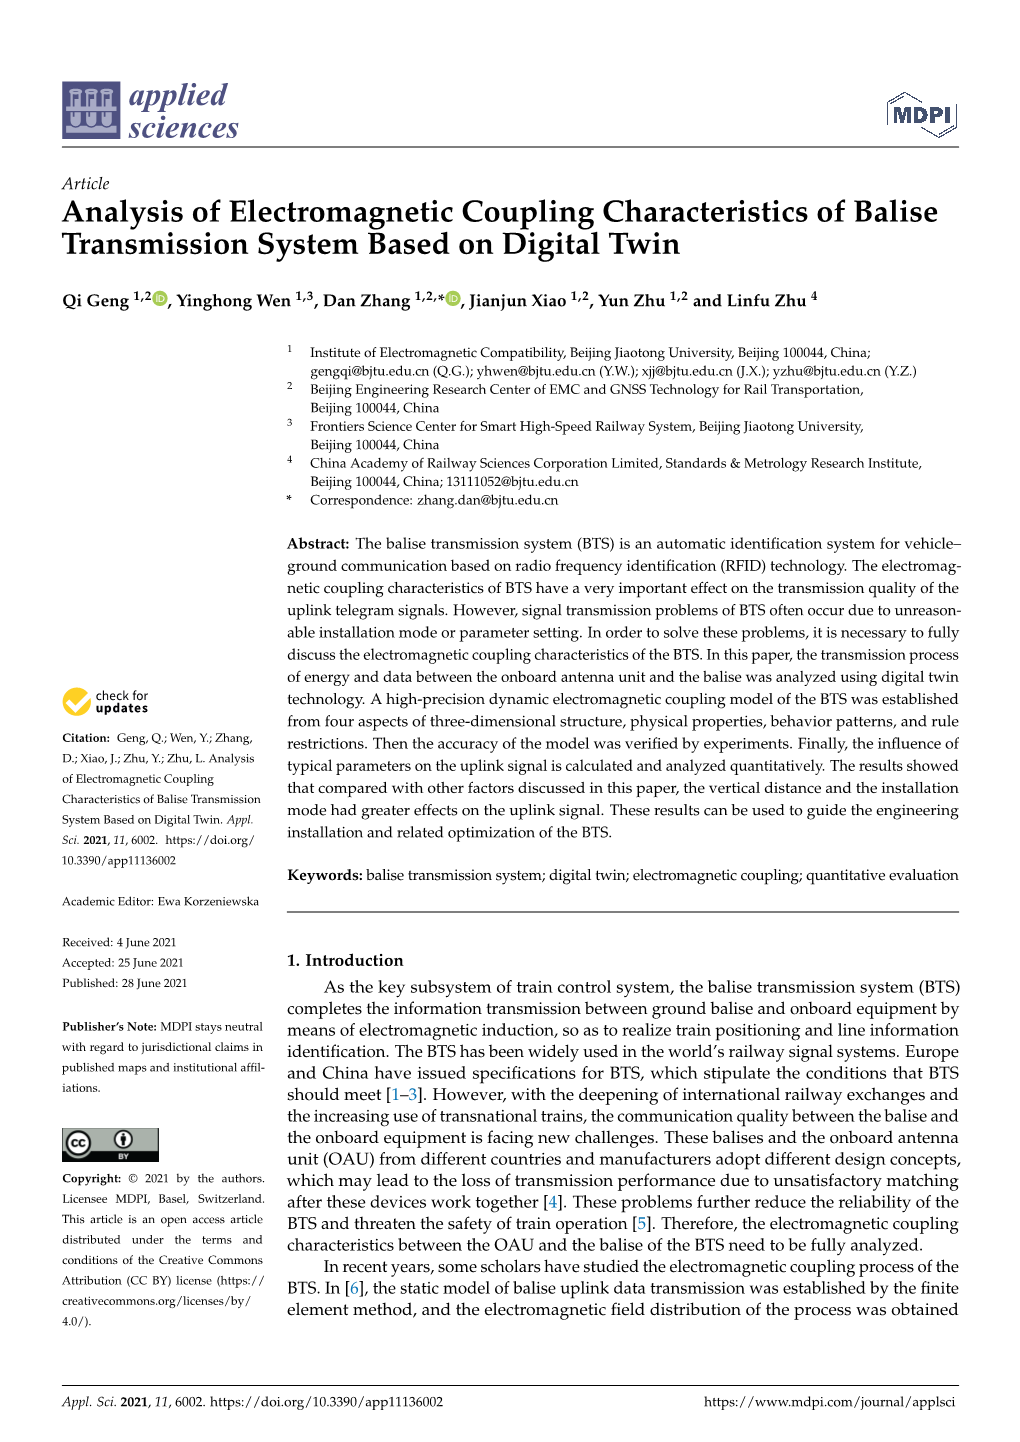 Analysis of Electromagnetic Coupling Characteristics of Balise Transmission System Based on Digital Twin